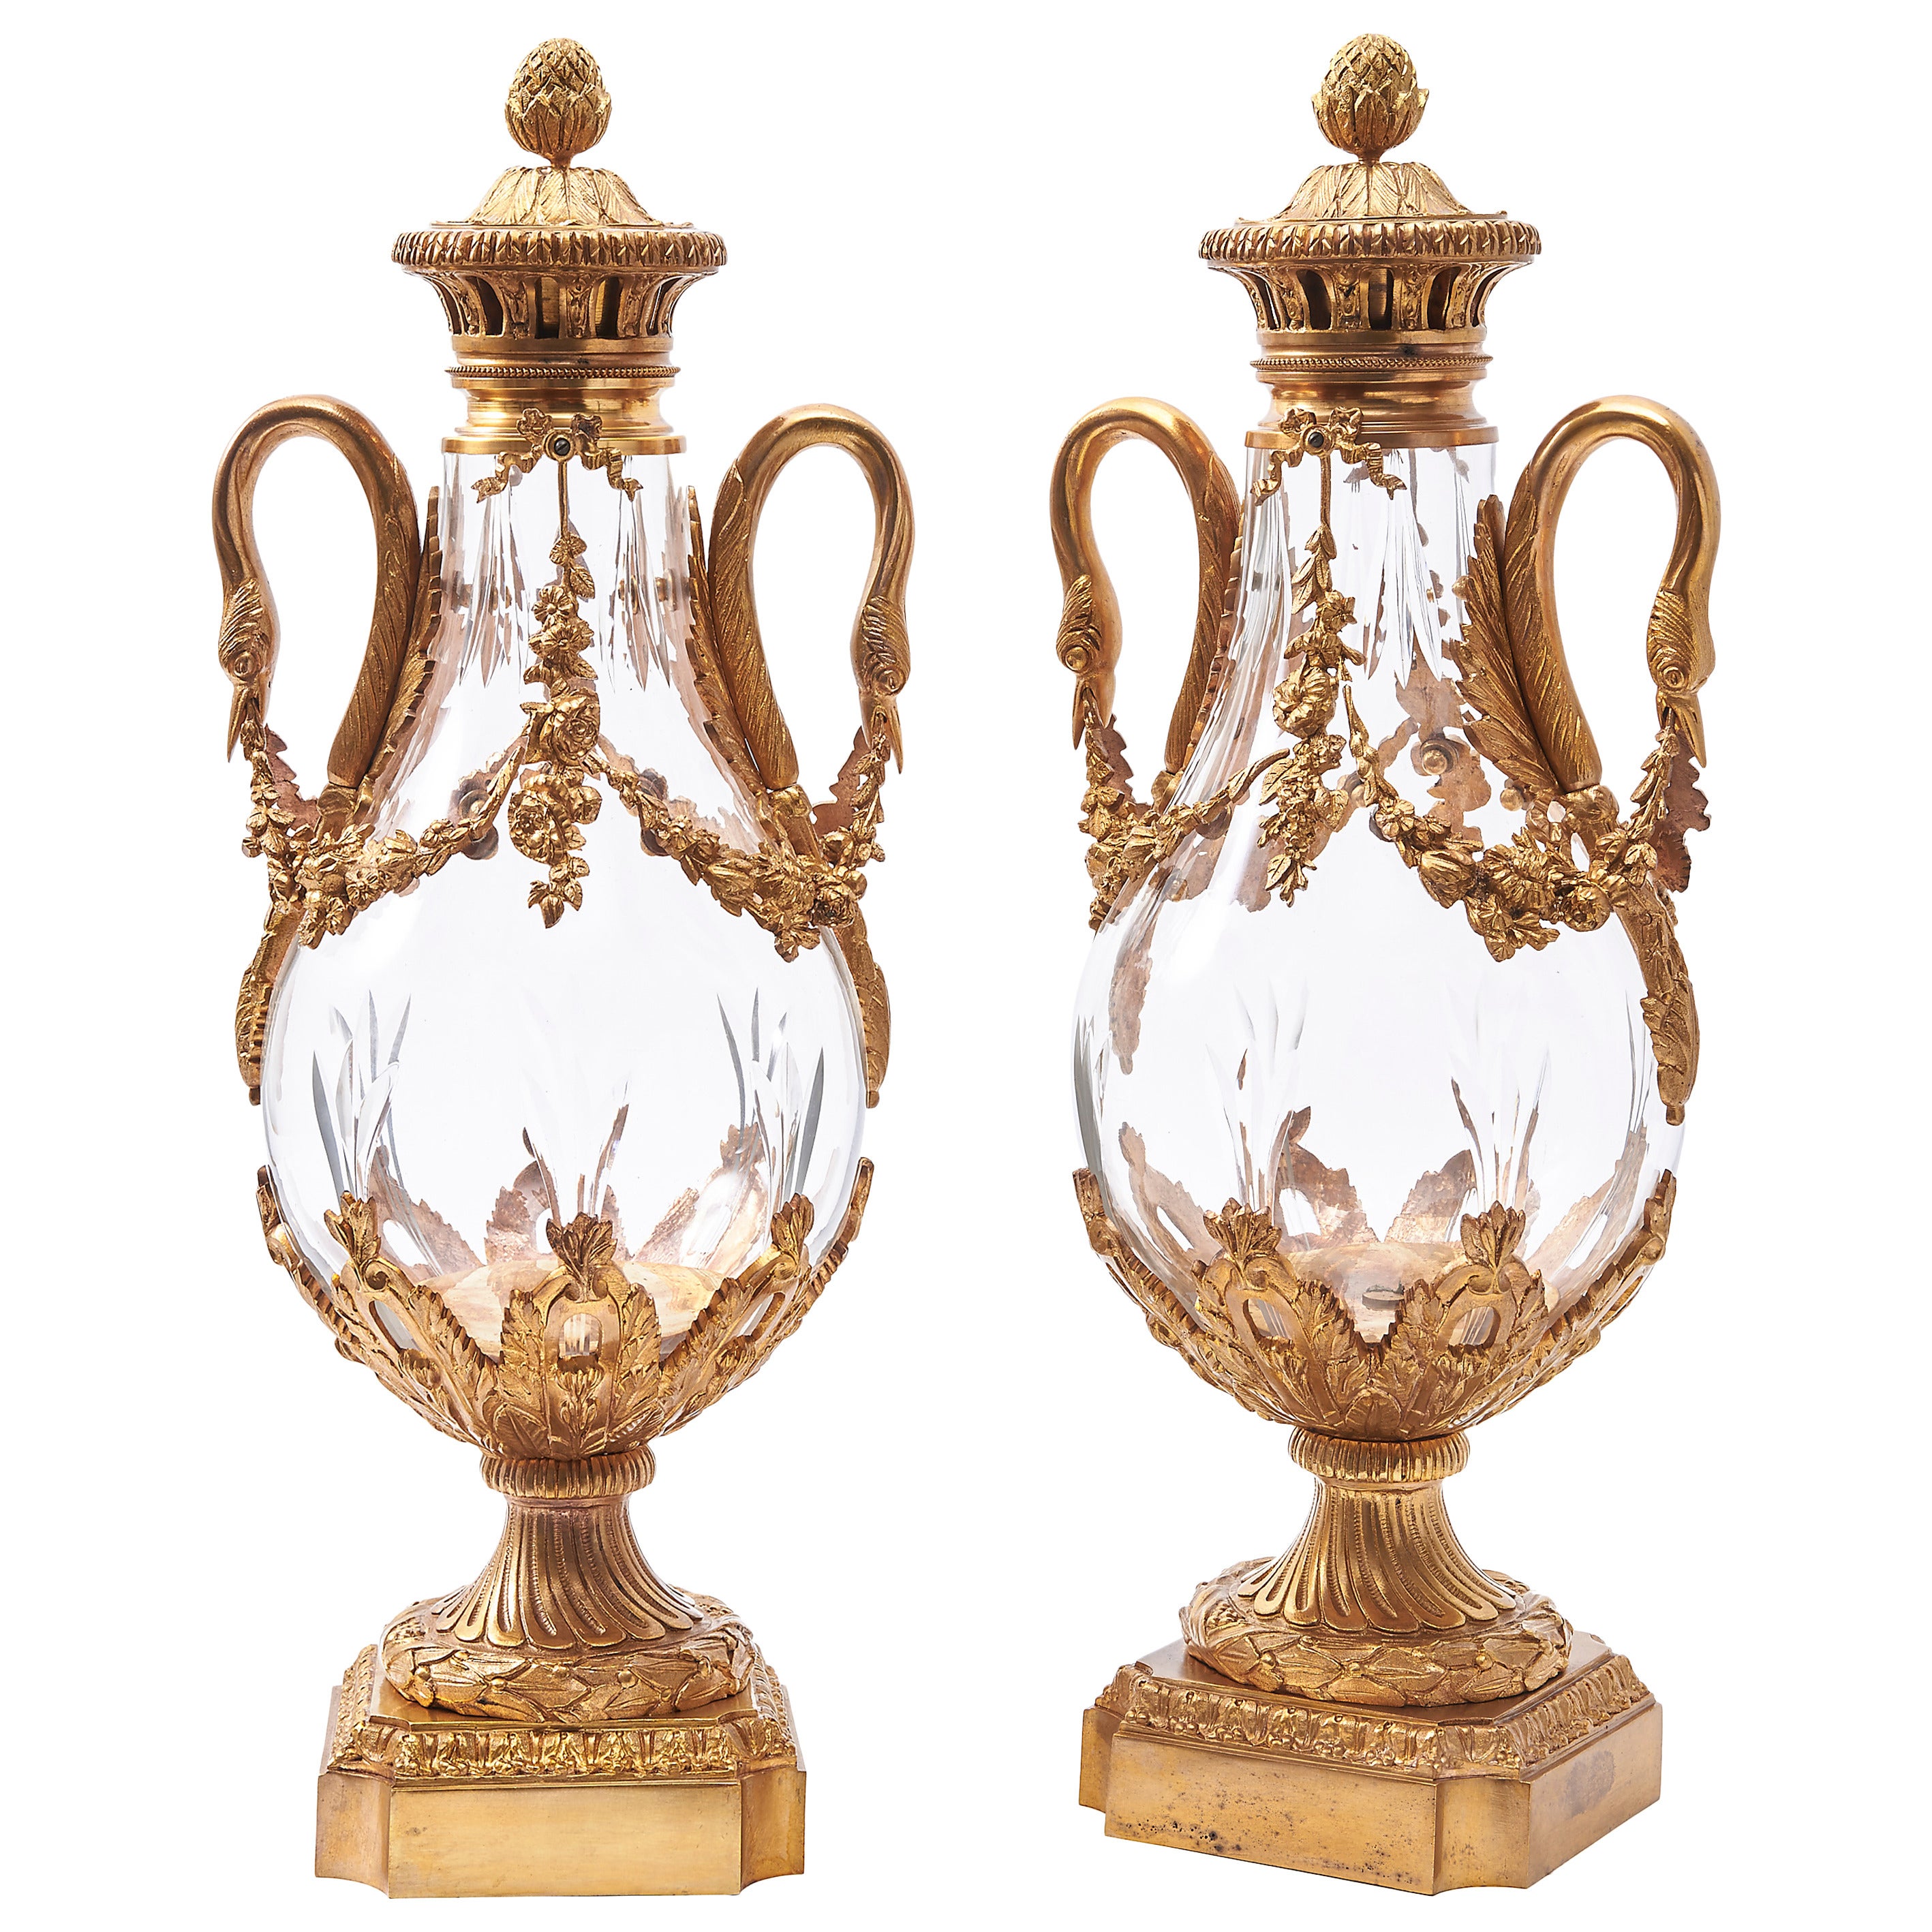 Pair of French Neoclassical Ormolu-Mounted Crystal Cassolettes, circa 1900